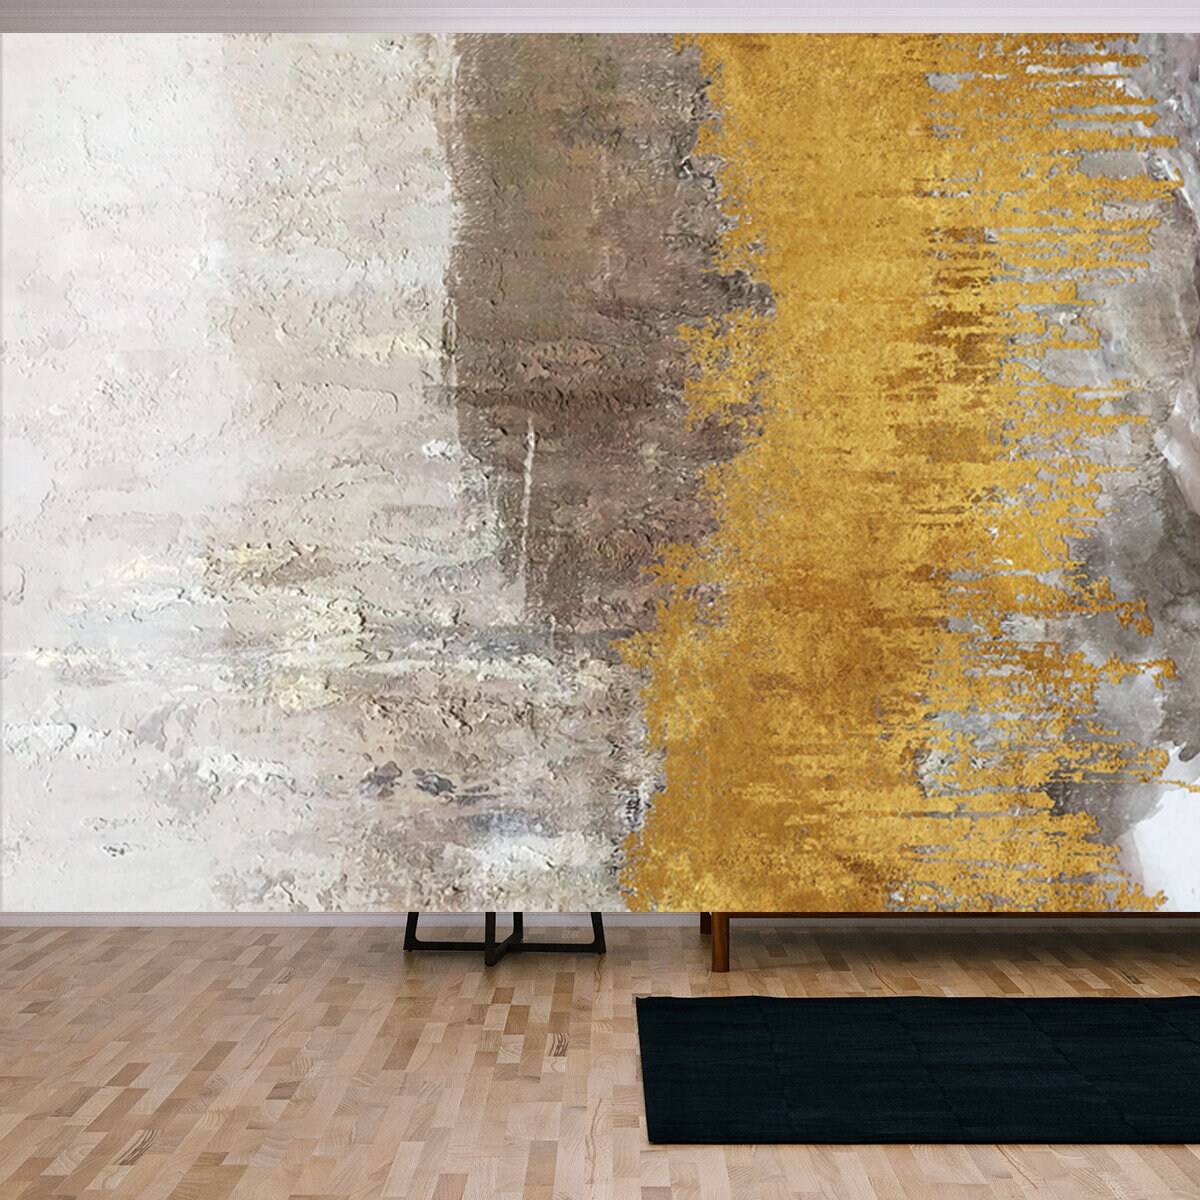 Modern Abstract Oil Painting Art Design. Orange, Gold and Blue Colors Wallpaper Living Room Mural